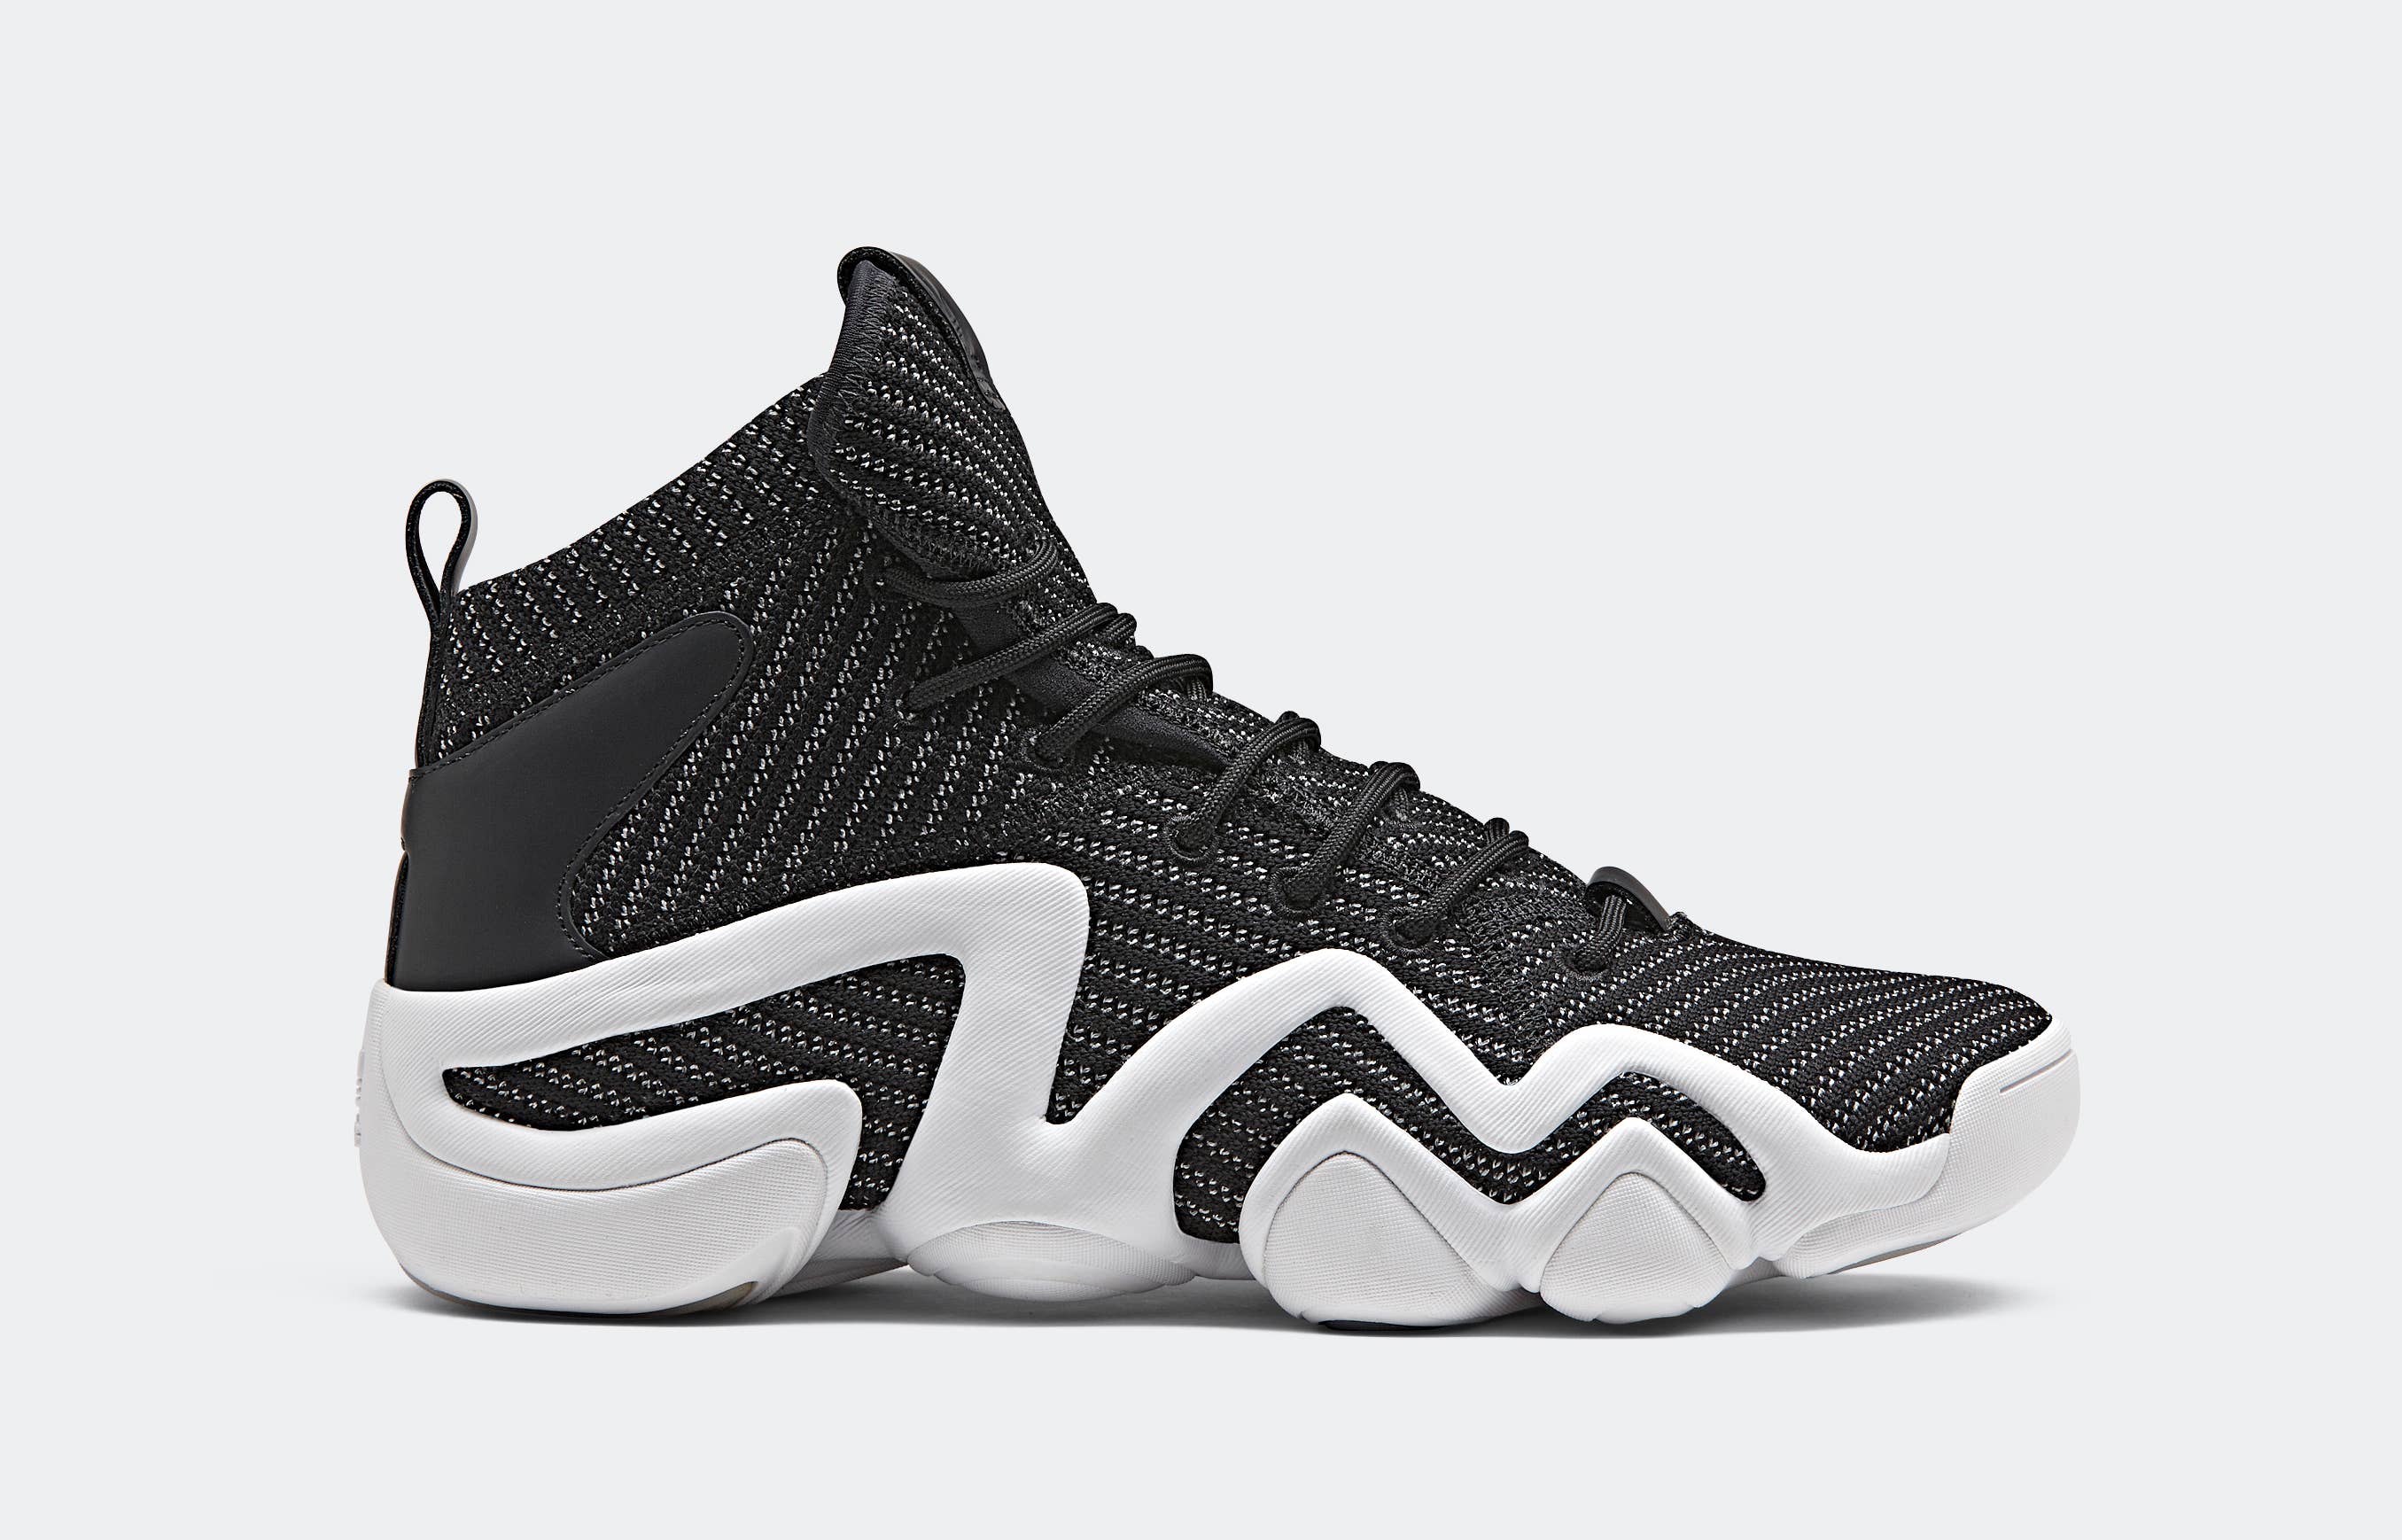 Adidas Crazy 8 ADV PK Lusso BY4423 (Lateral)